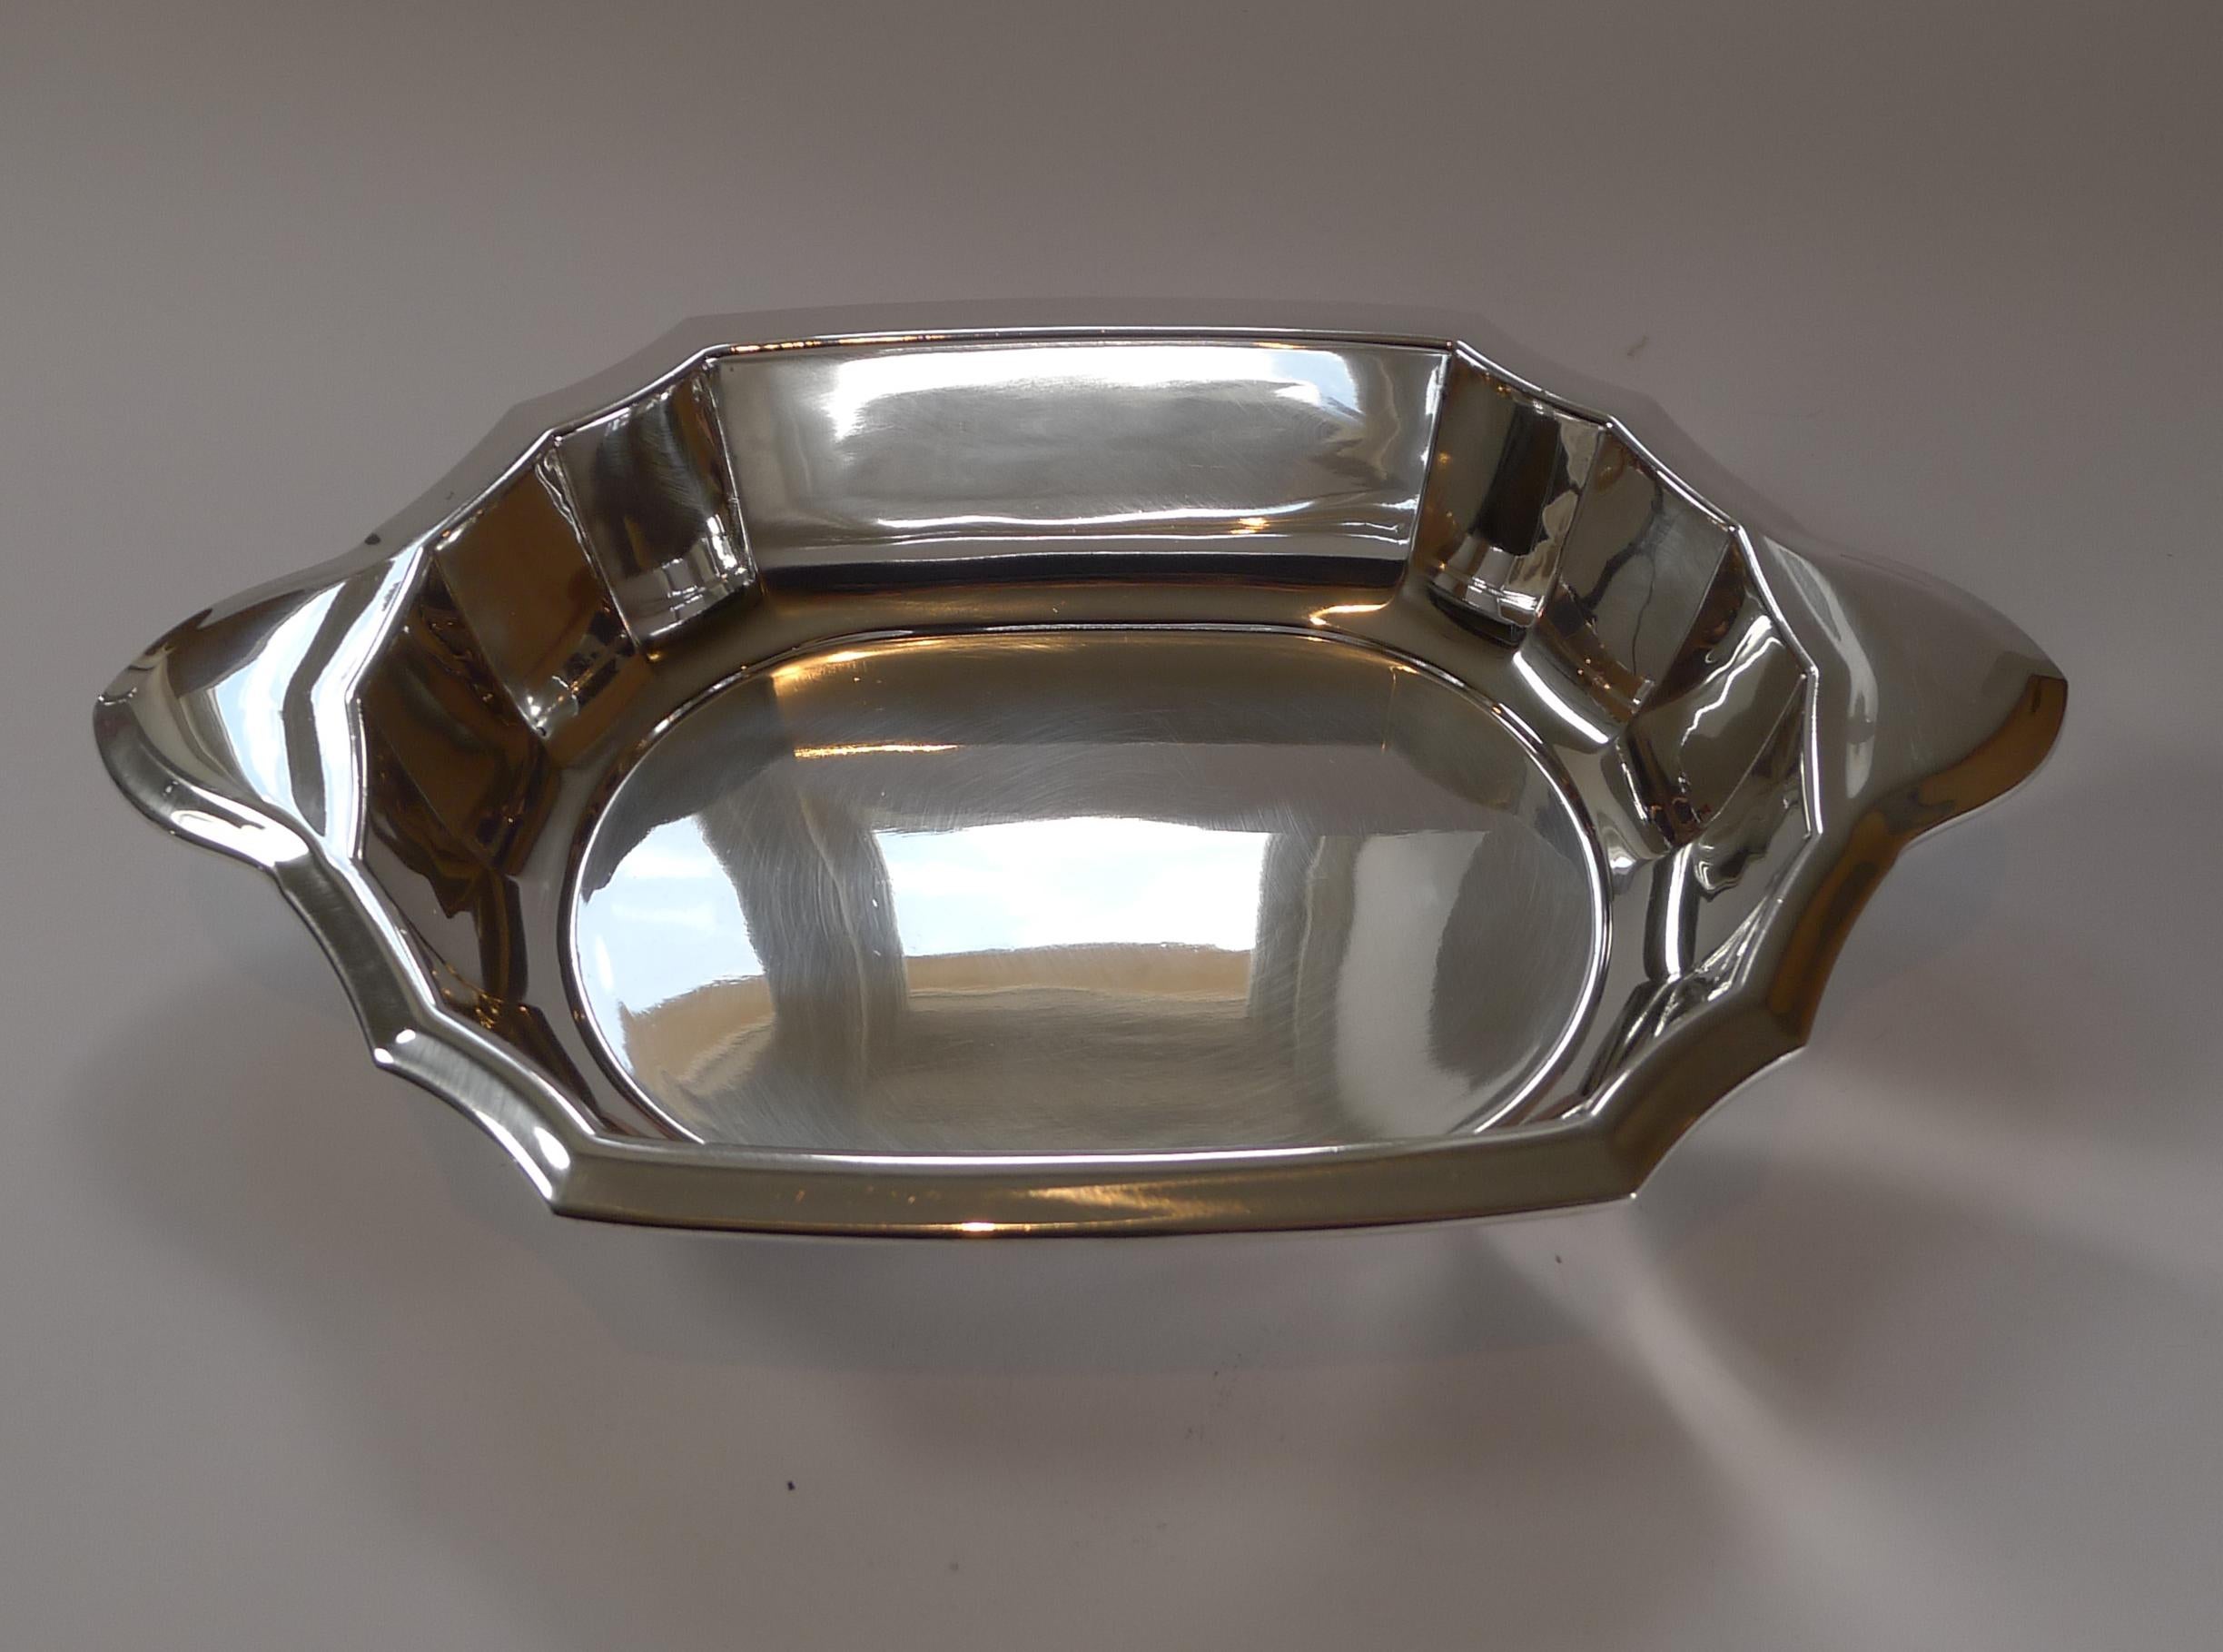 English French Art Deco Christofle / Gallia Covered Serving Dish, c. 1930 For Sale